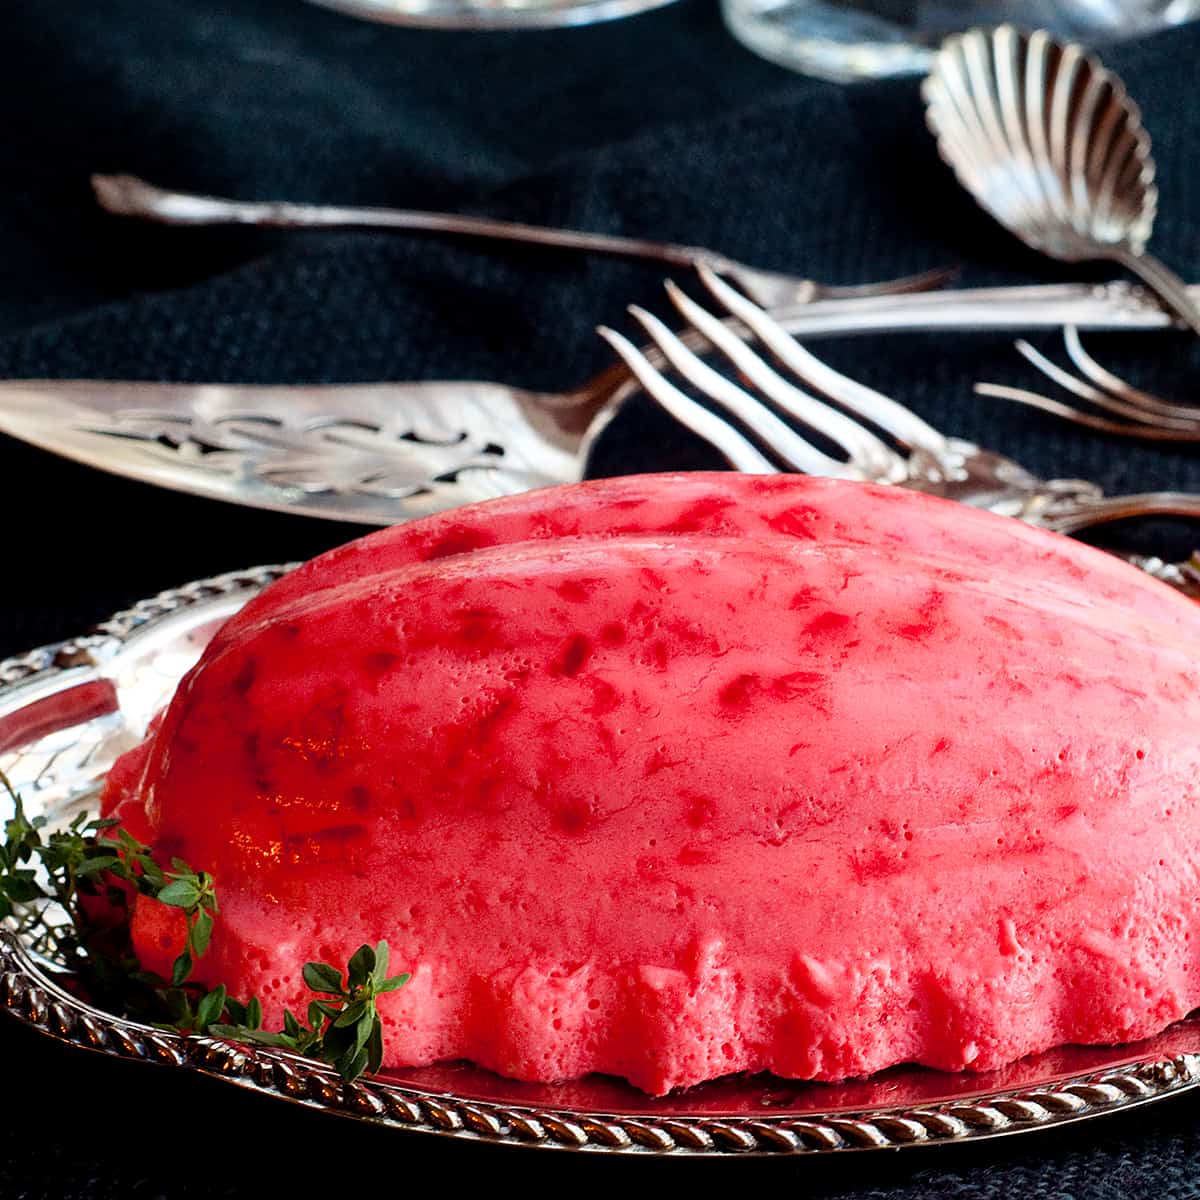 Raspberry jello mold on a silver serving tray with vintage serving pieces in the background.